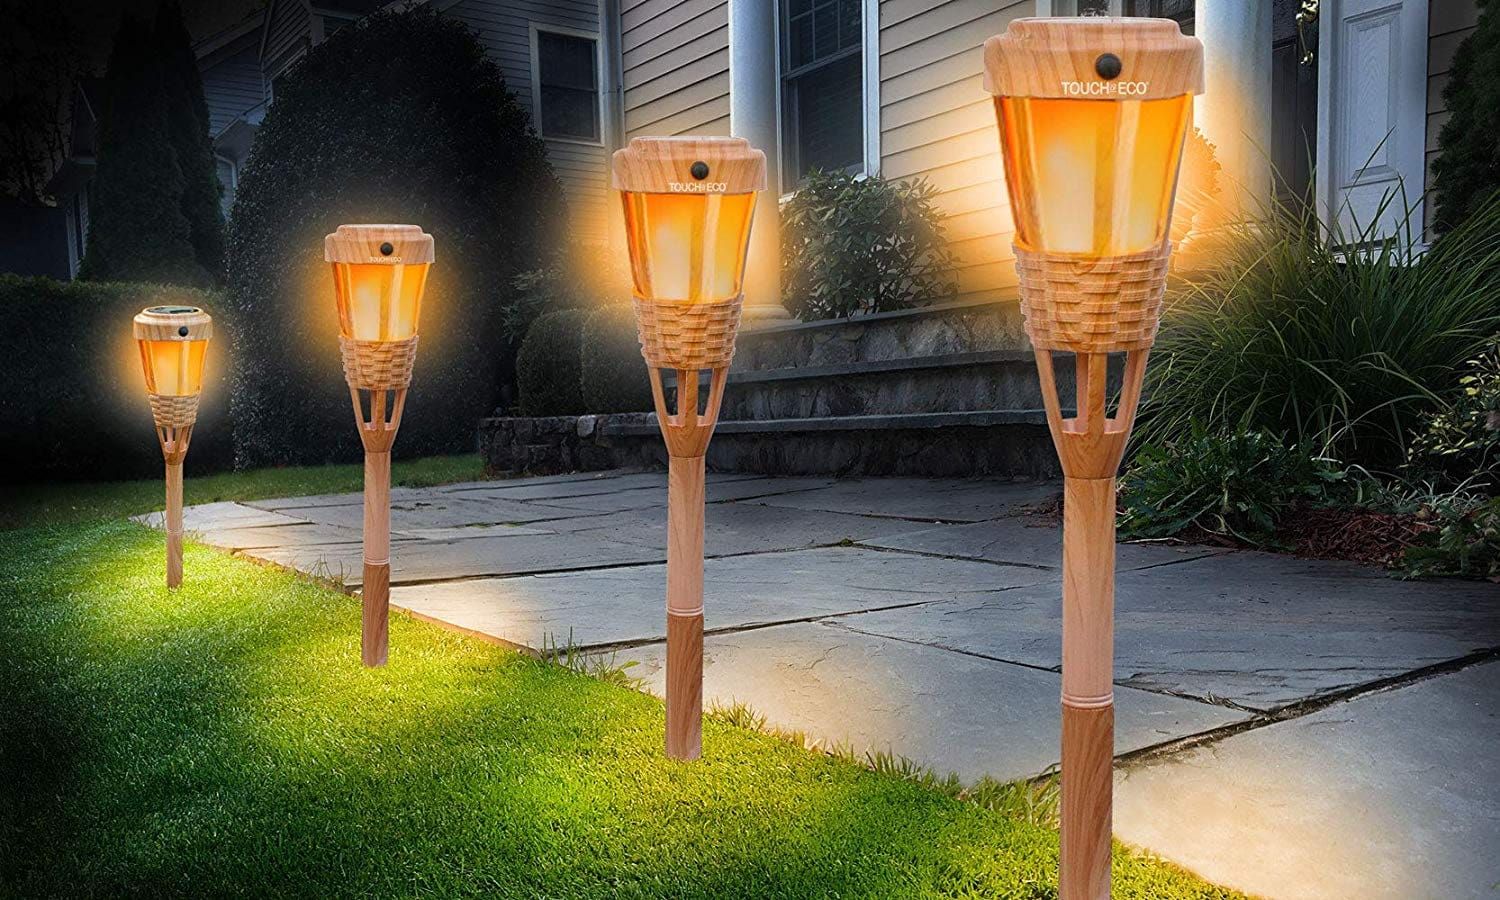 4 Touch of ECO suntorch gives lights to pathway.